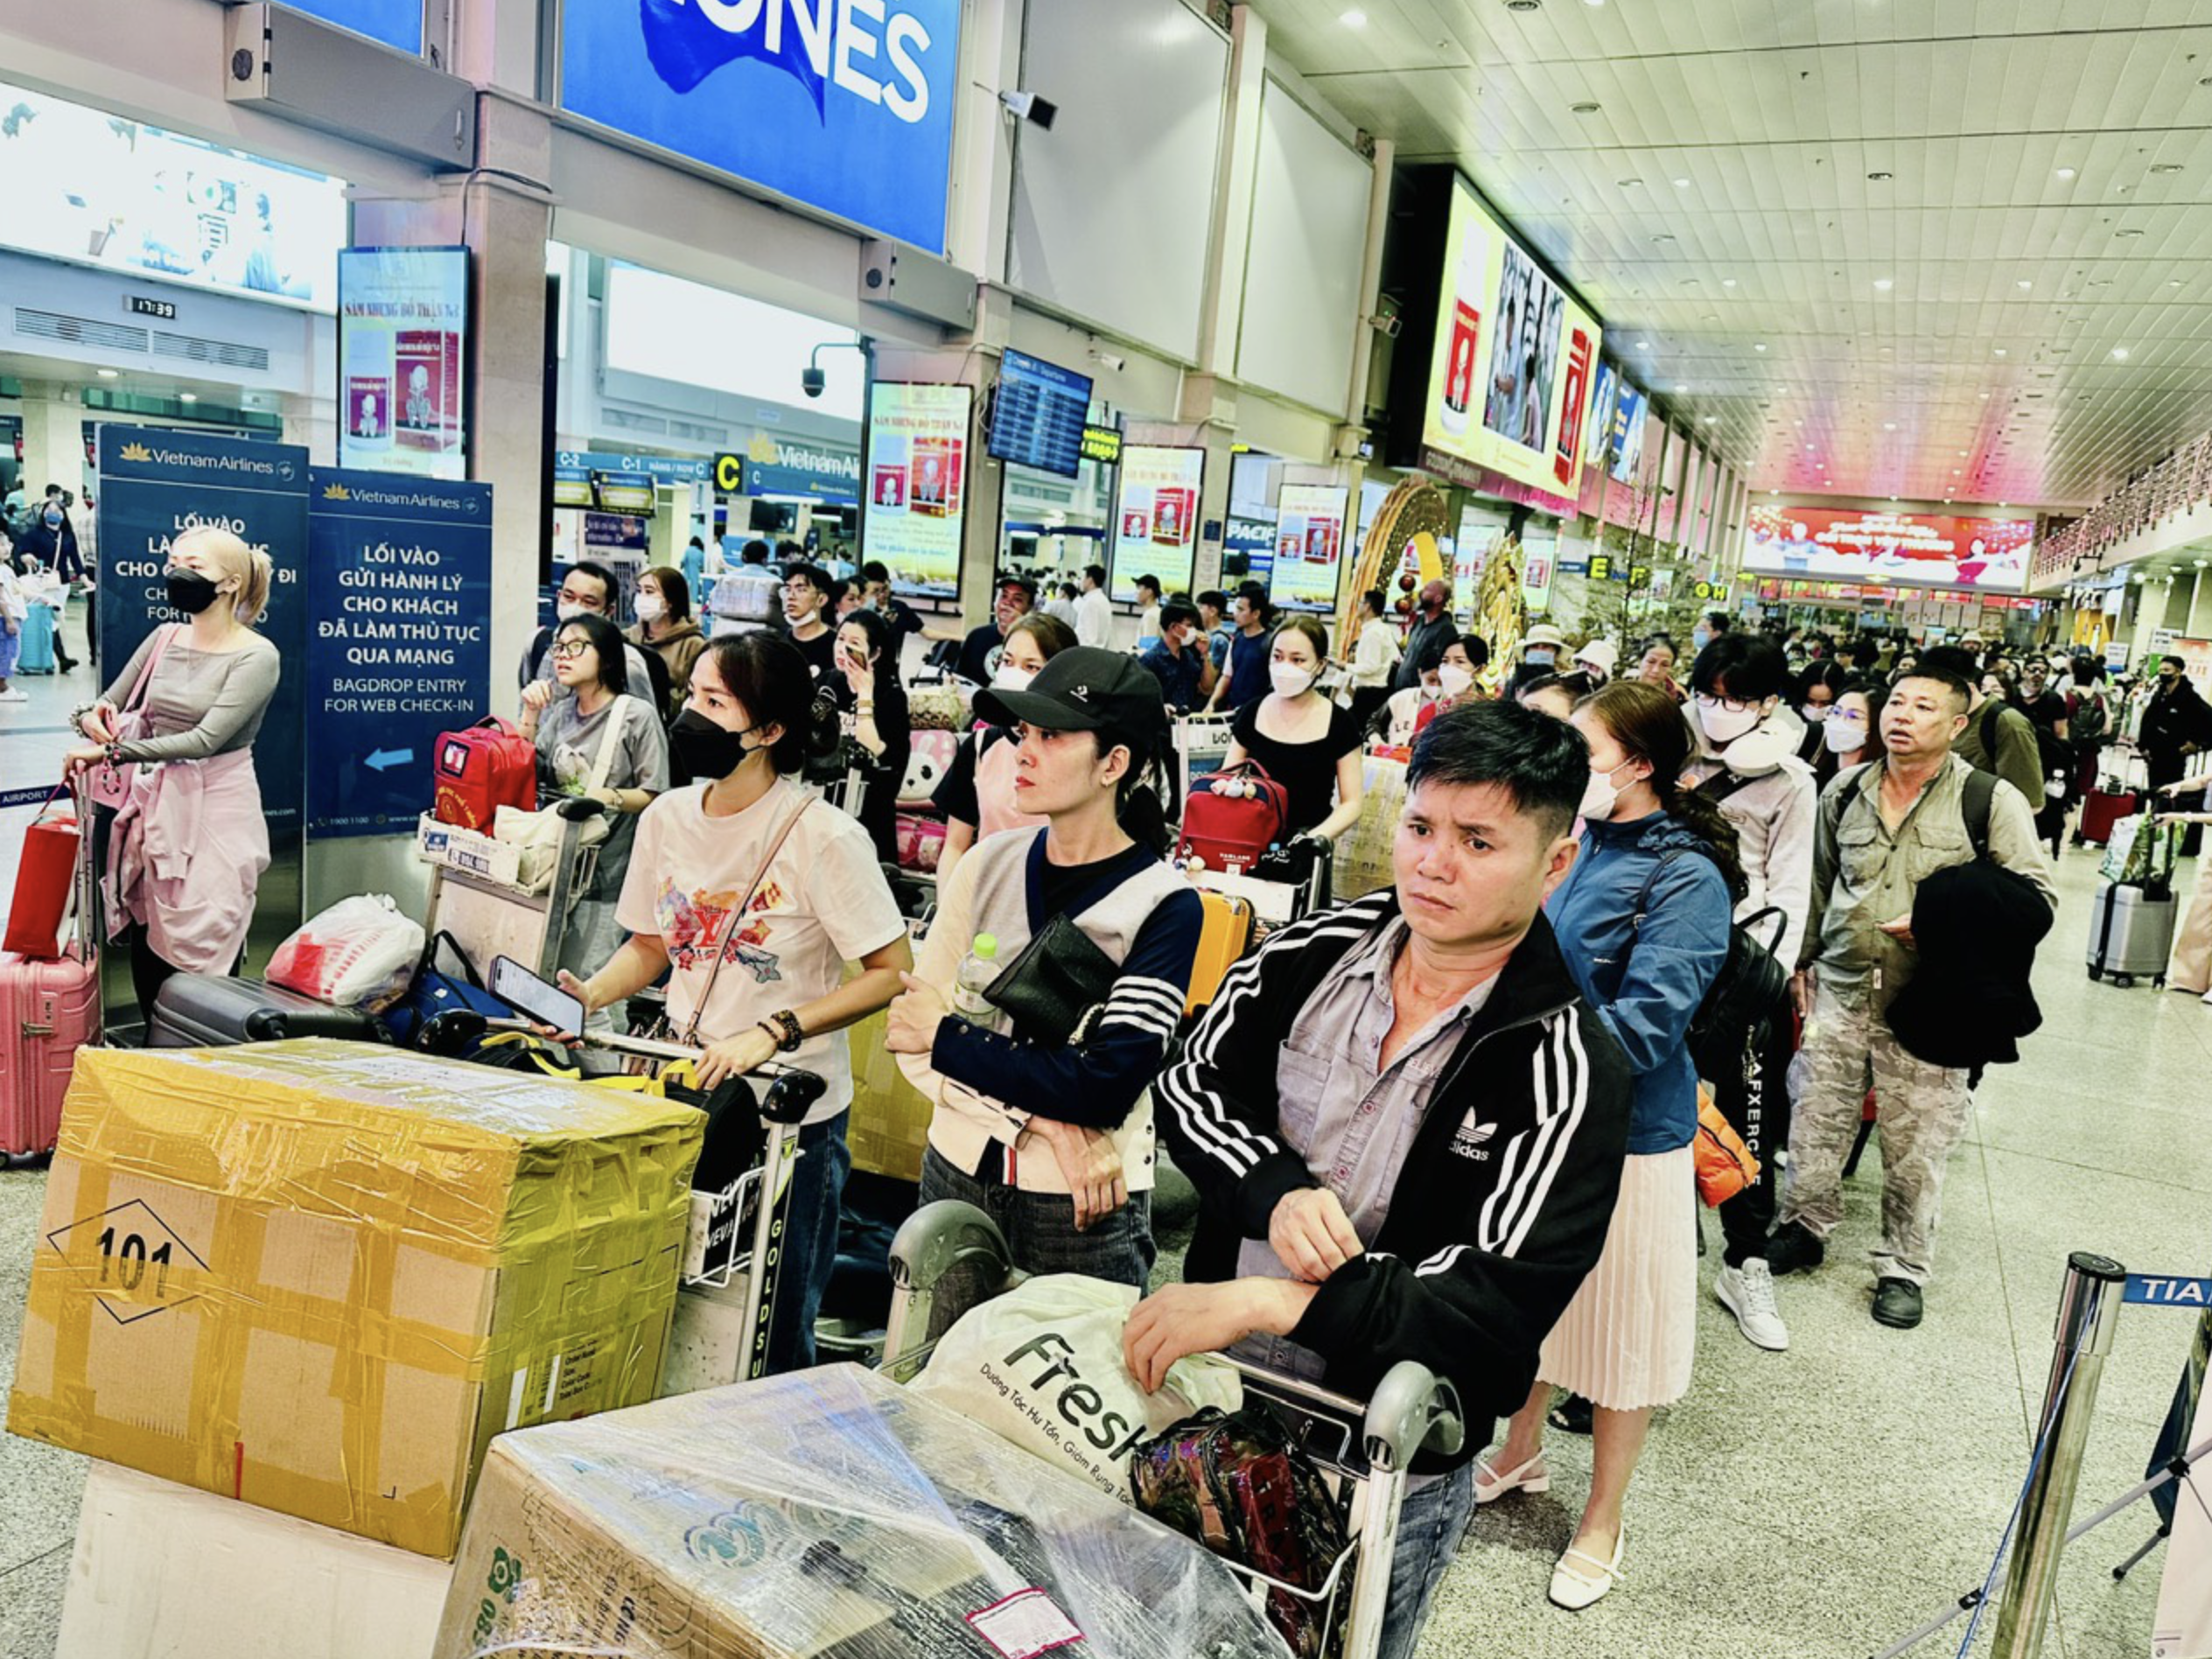 About 700 flights delayed, canceled at Ho Chi Minh City airport within 3 days